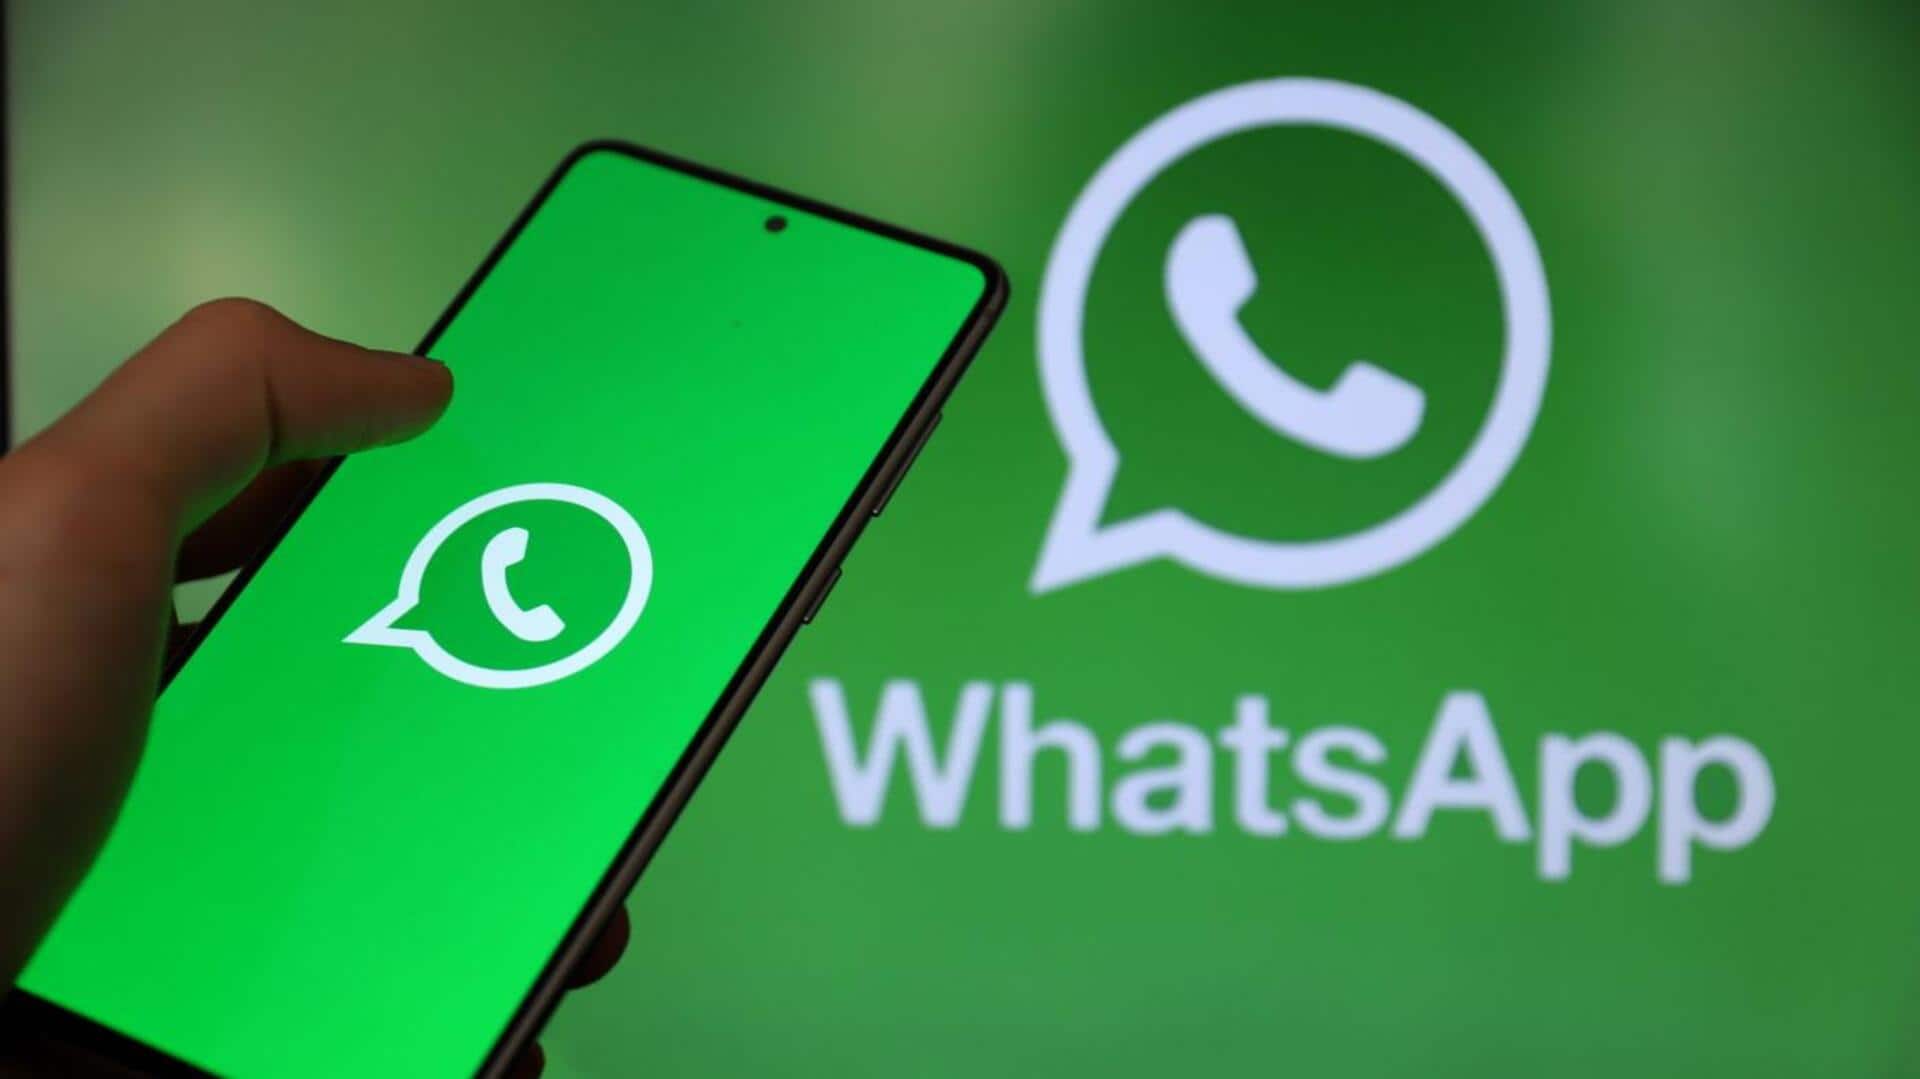 WhatsApp to let you share music audio during video calls